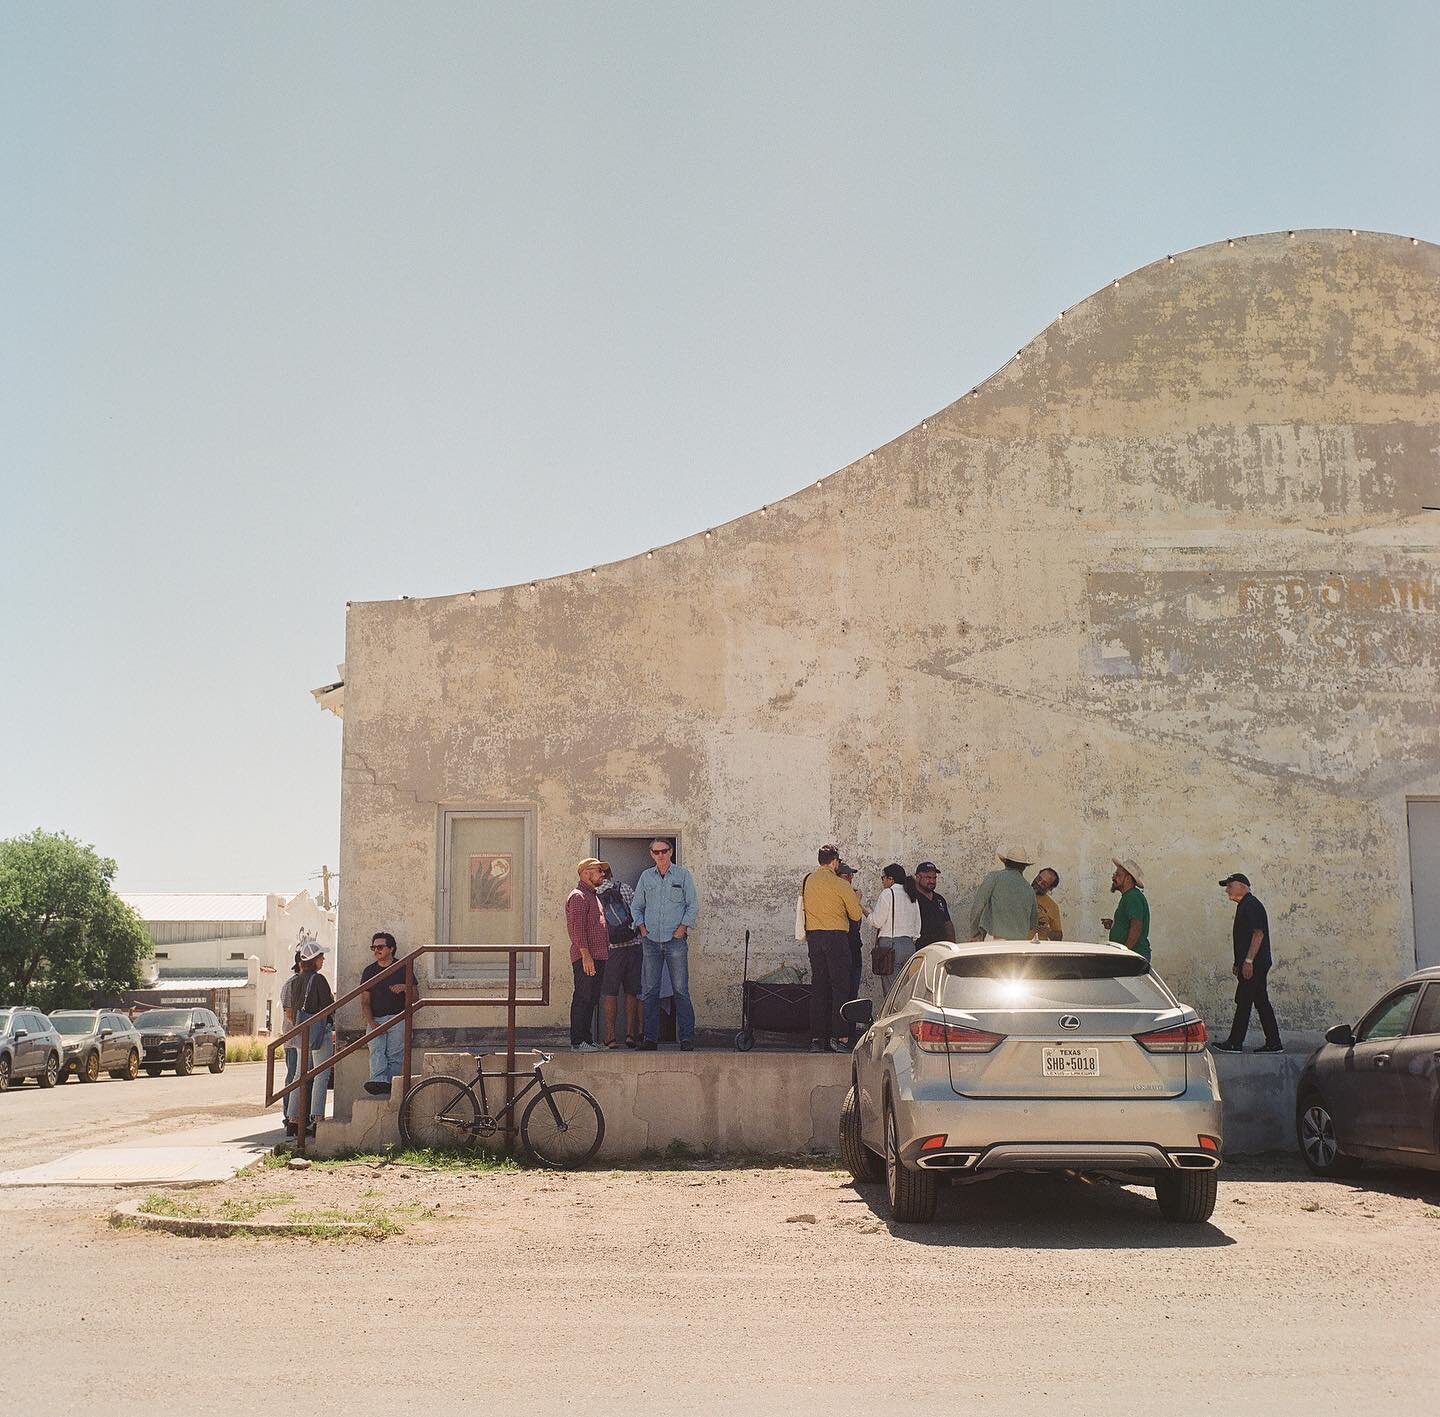 Marfa Agave Festival (months ago!) and a visit to El Paso several months later
#rollei35 
#kodakgold200